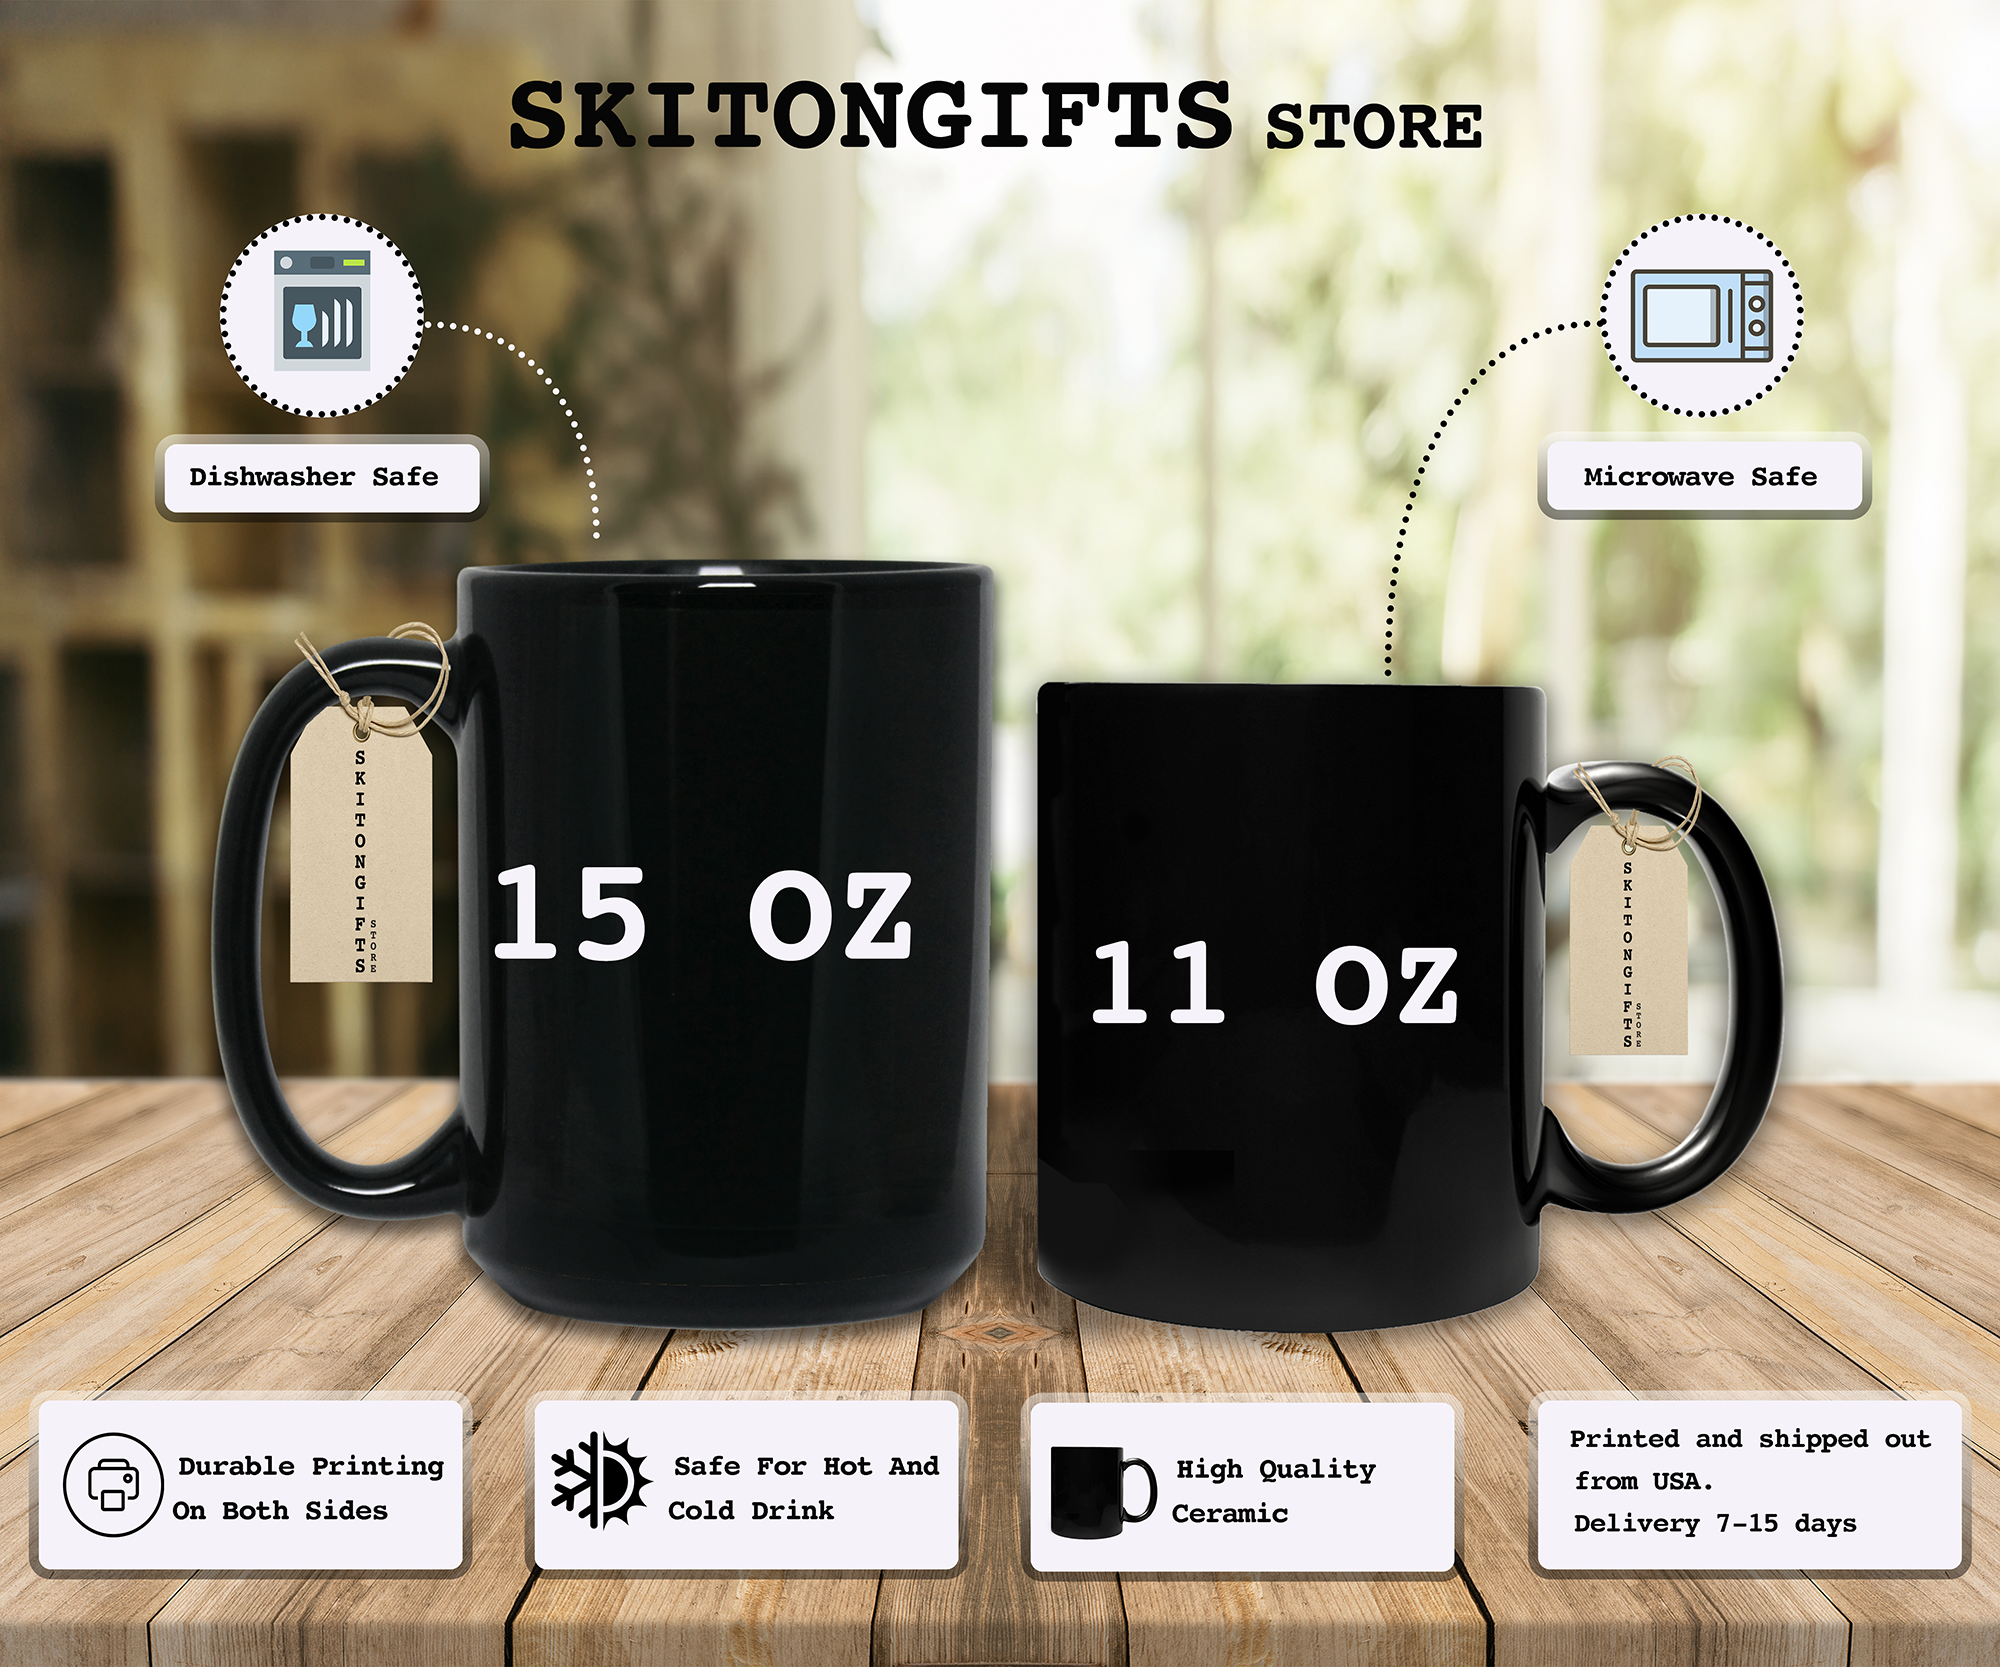 Skitongifts Funny Ceramic Novelty Coffee Mug For Bowling Addicts They Call Me Kingpin lOW7jXM